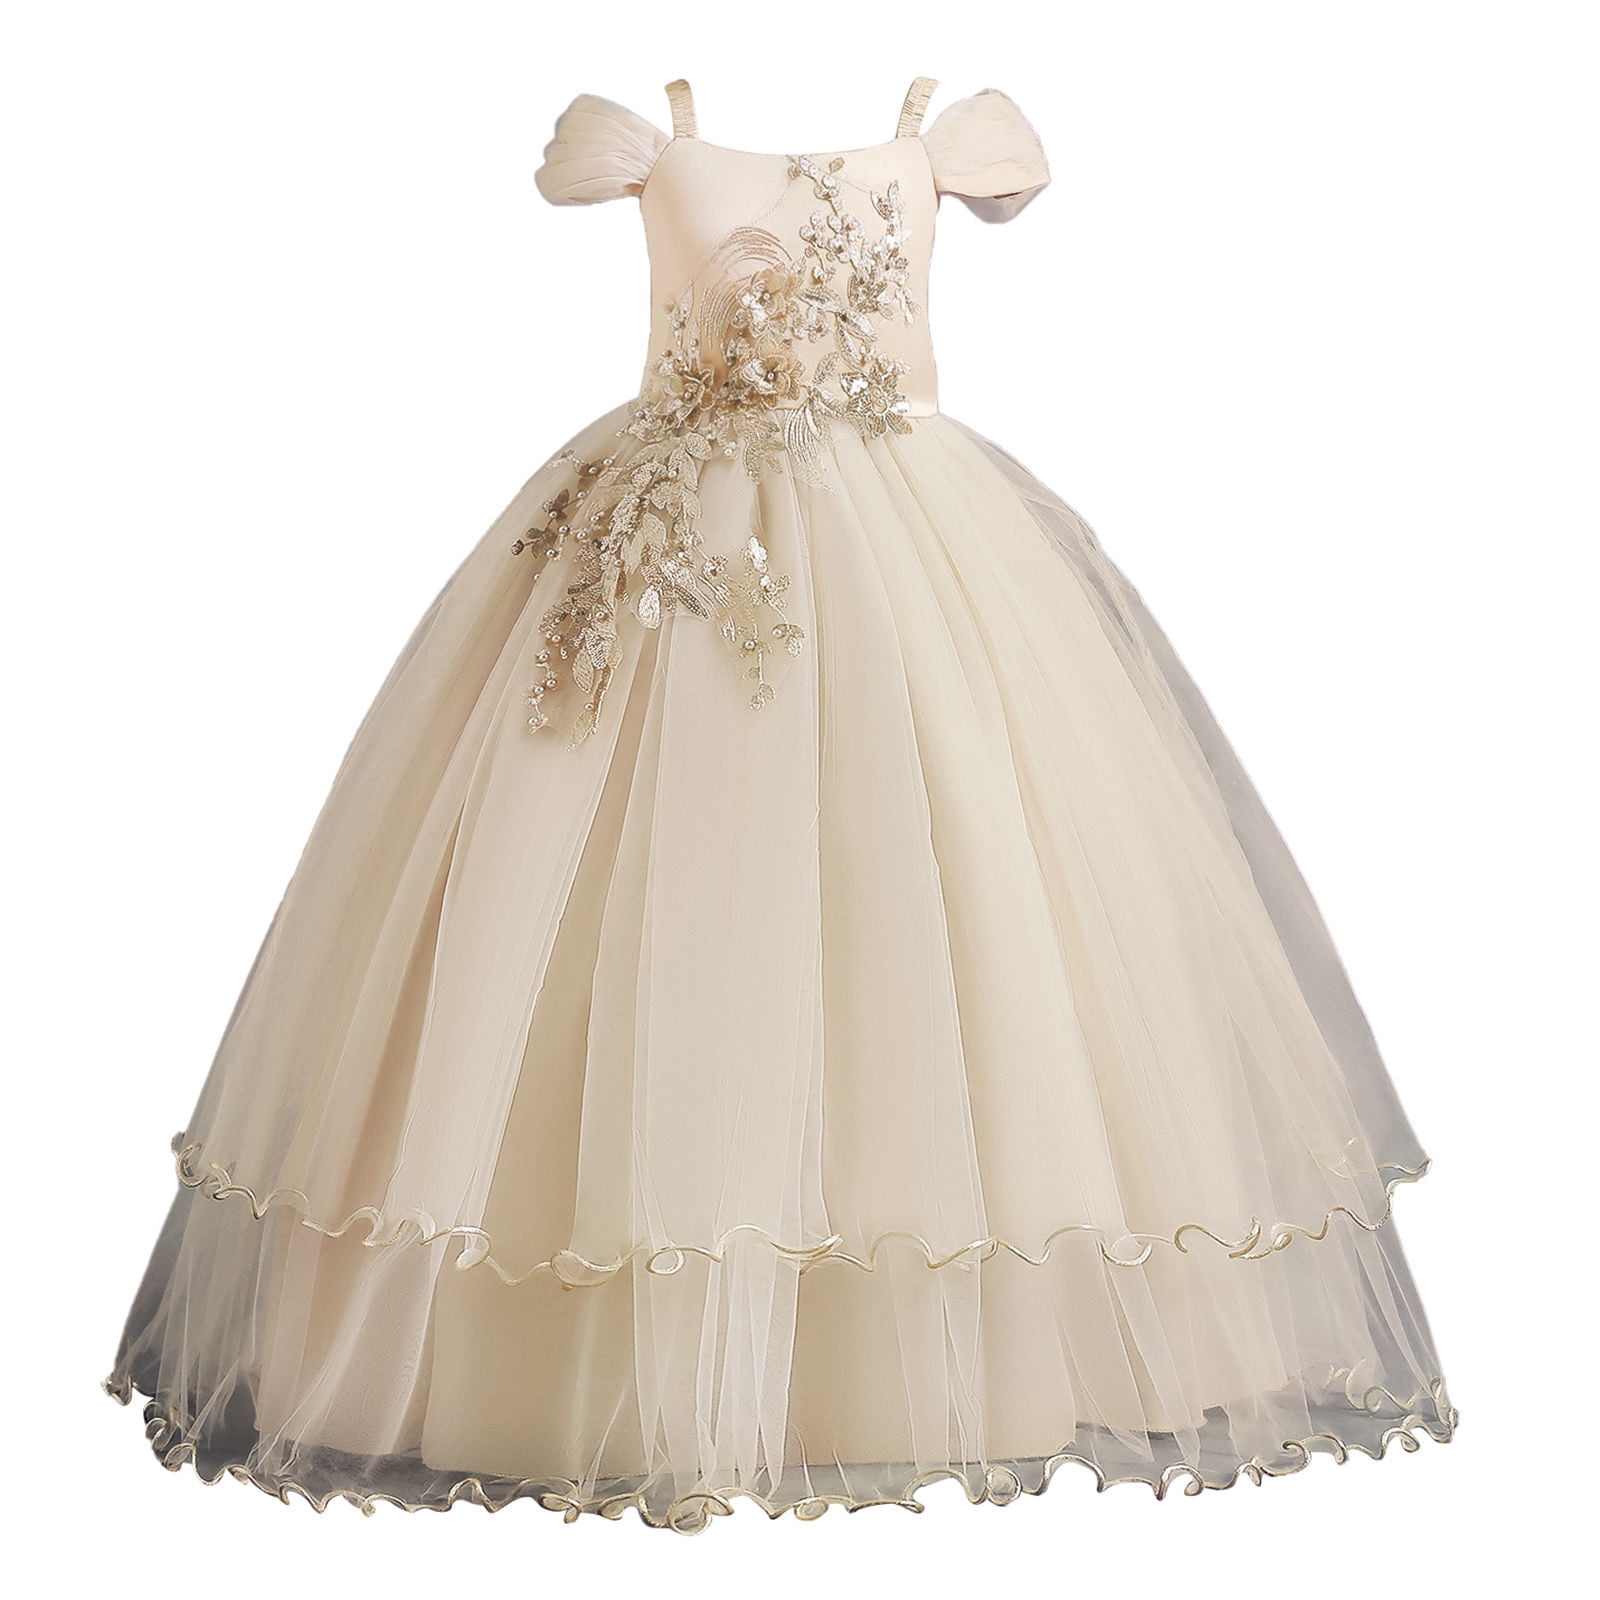 Flower Girl Evening Gown With Bow With Net Design For Birthday, Christmas,  And Princess Parties From Guoguo888, $42.74 | DHgate.Com